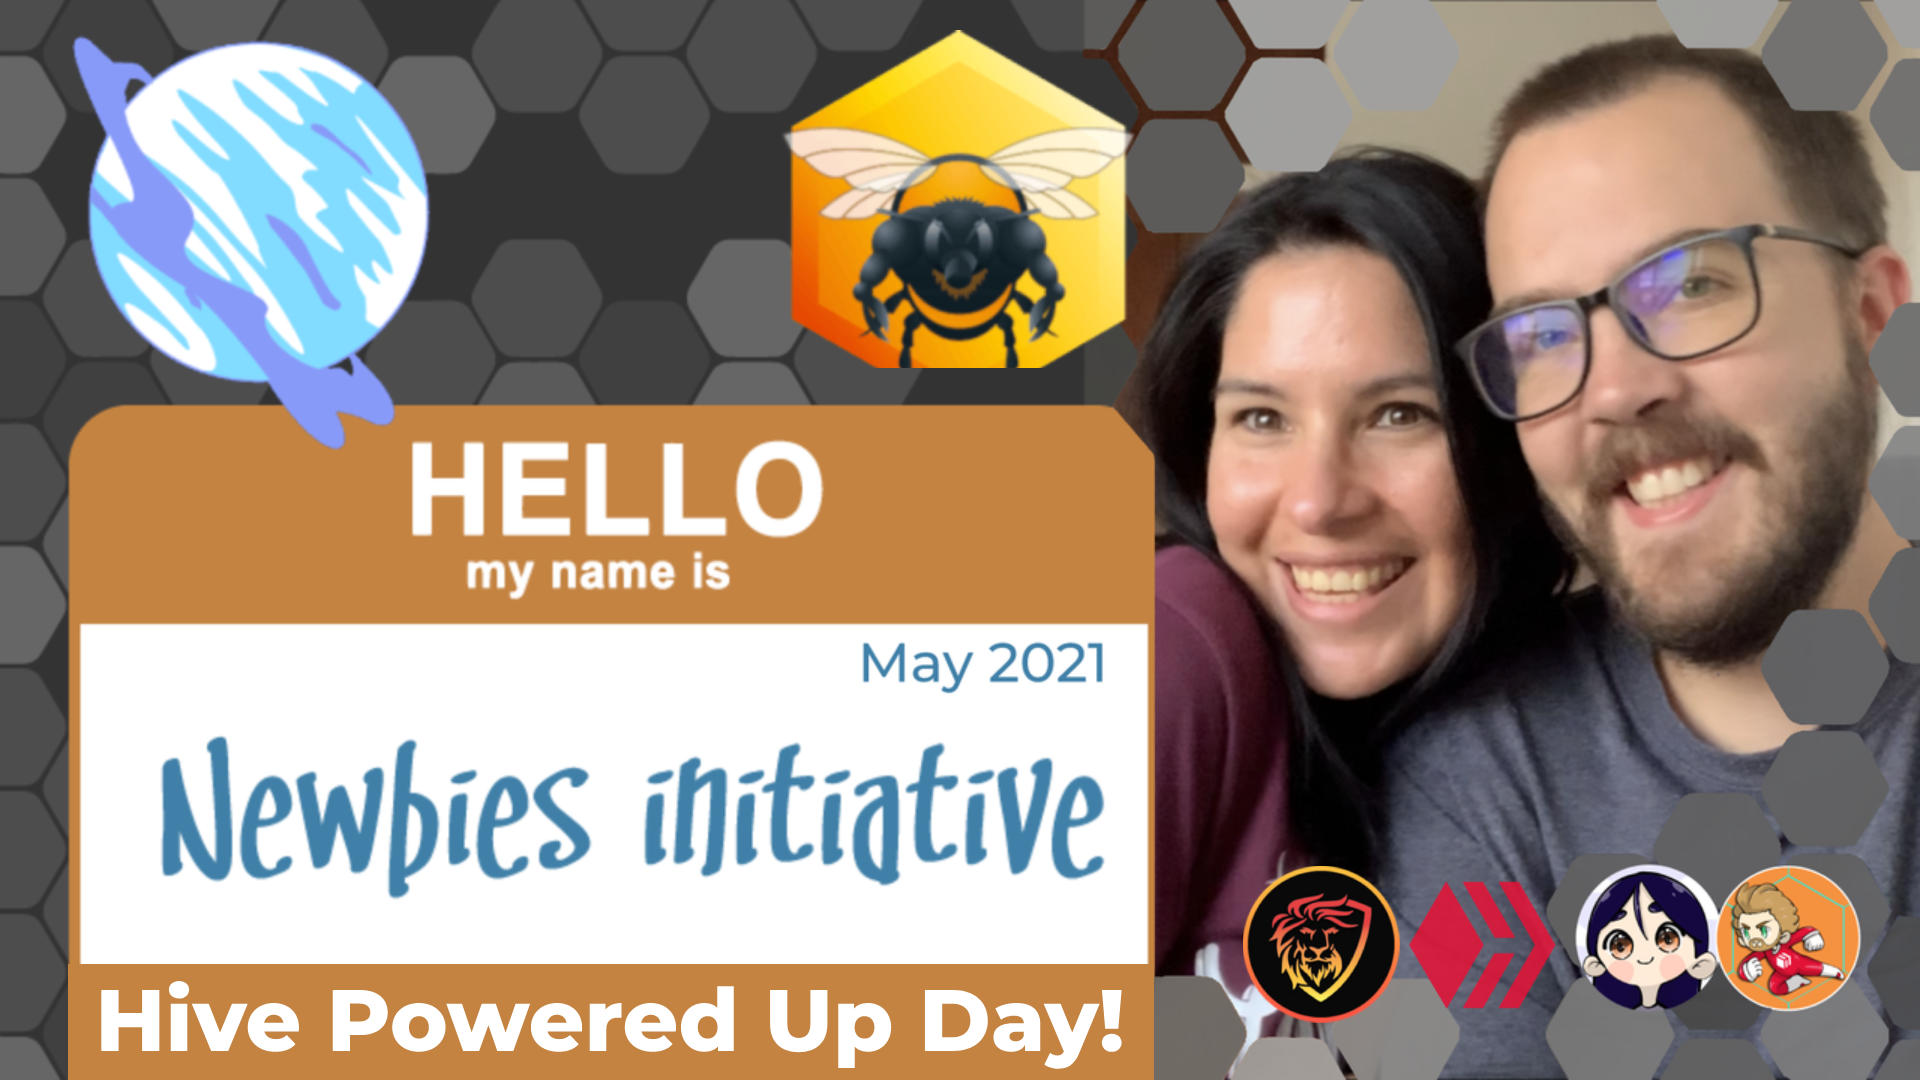 @aliento/newbies-initiative-extra-task-prepare-for-hive-power-up-day-eng-spa